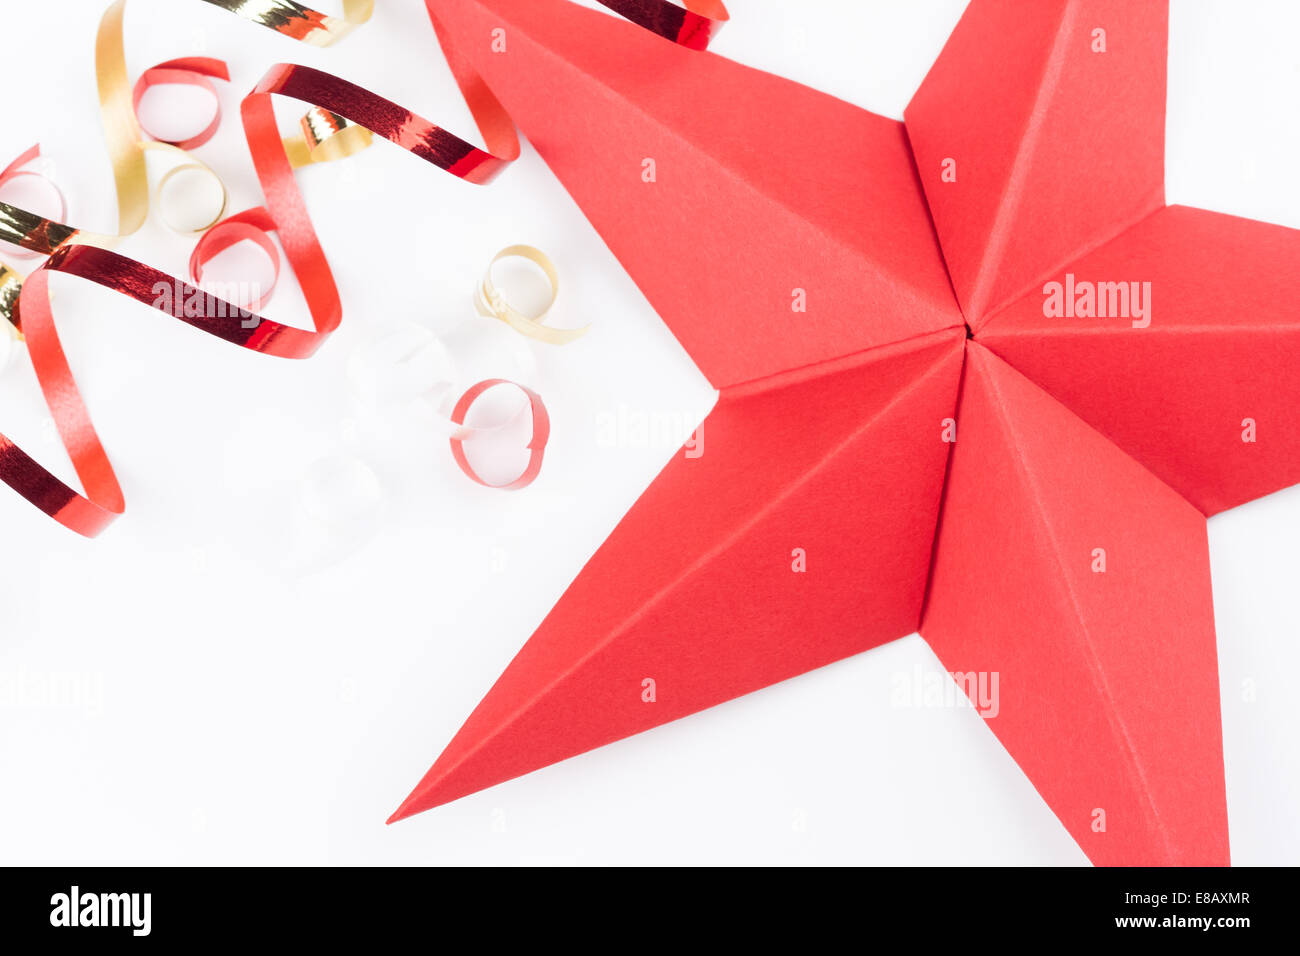 Origami Christmas Star High Resolution Stock Photography and Images - Alamy